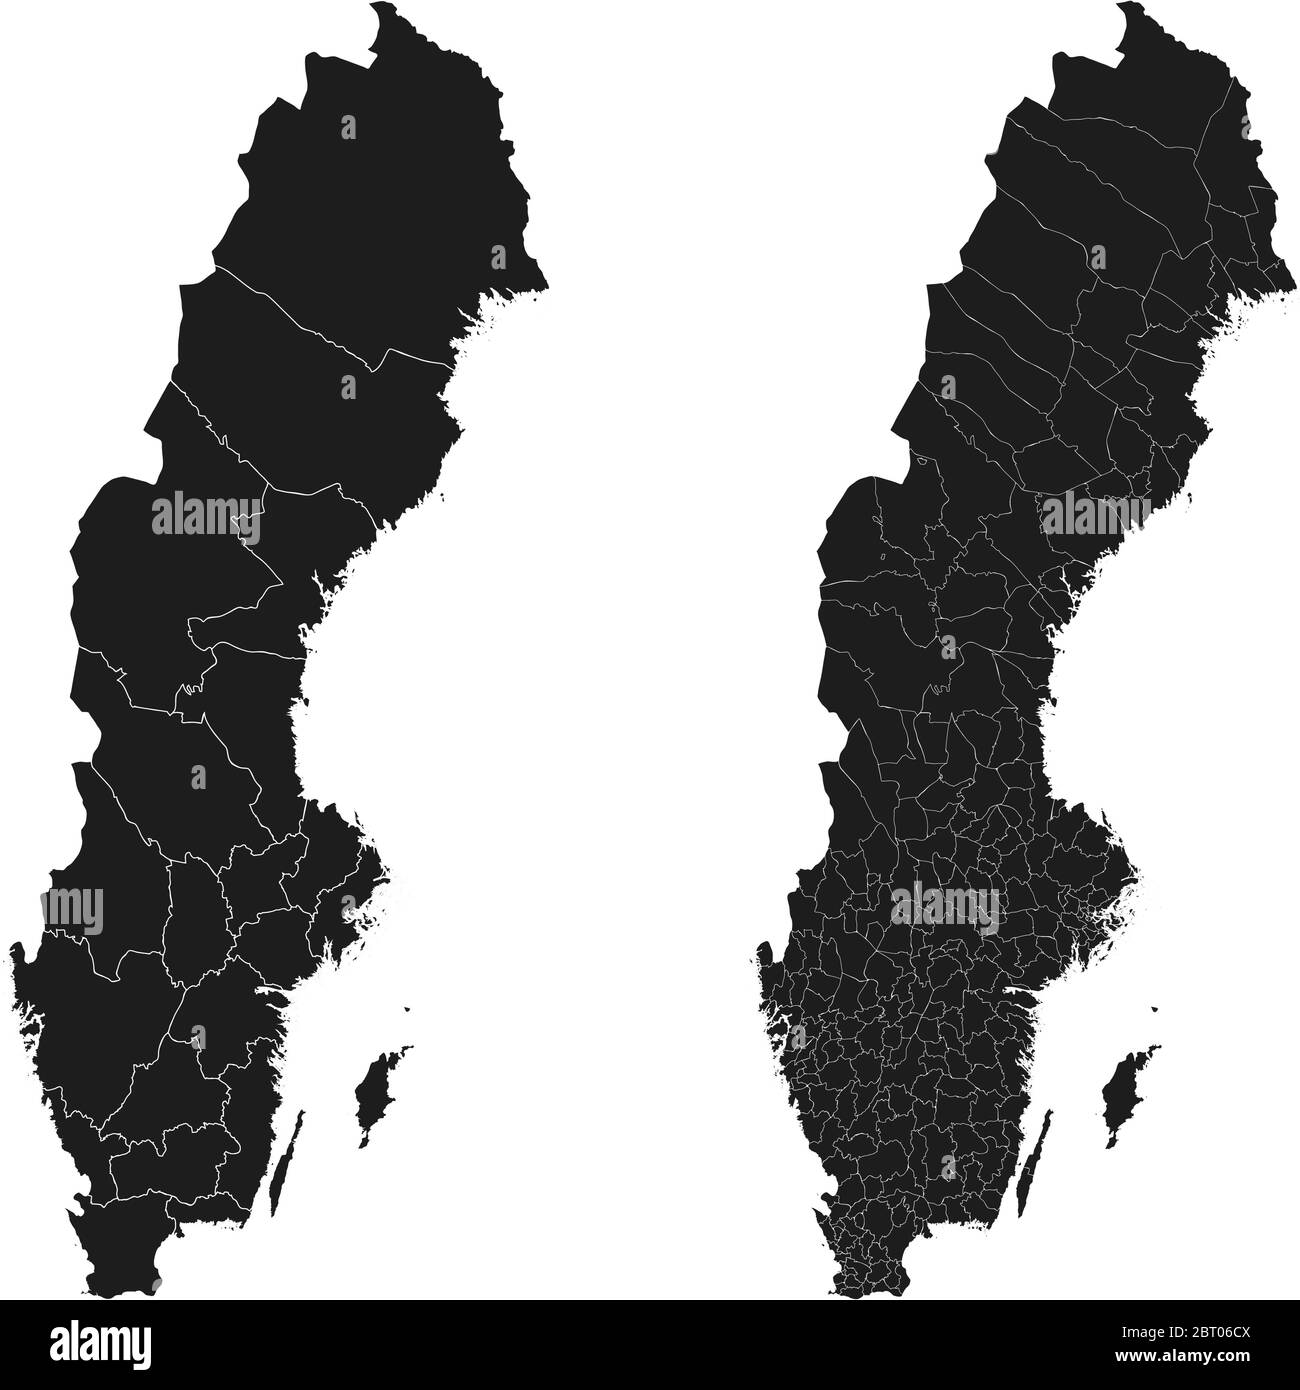 Sweden vector maps with administrative regions, municipalities, departments, borders Stock Vector